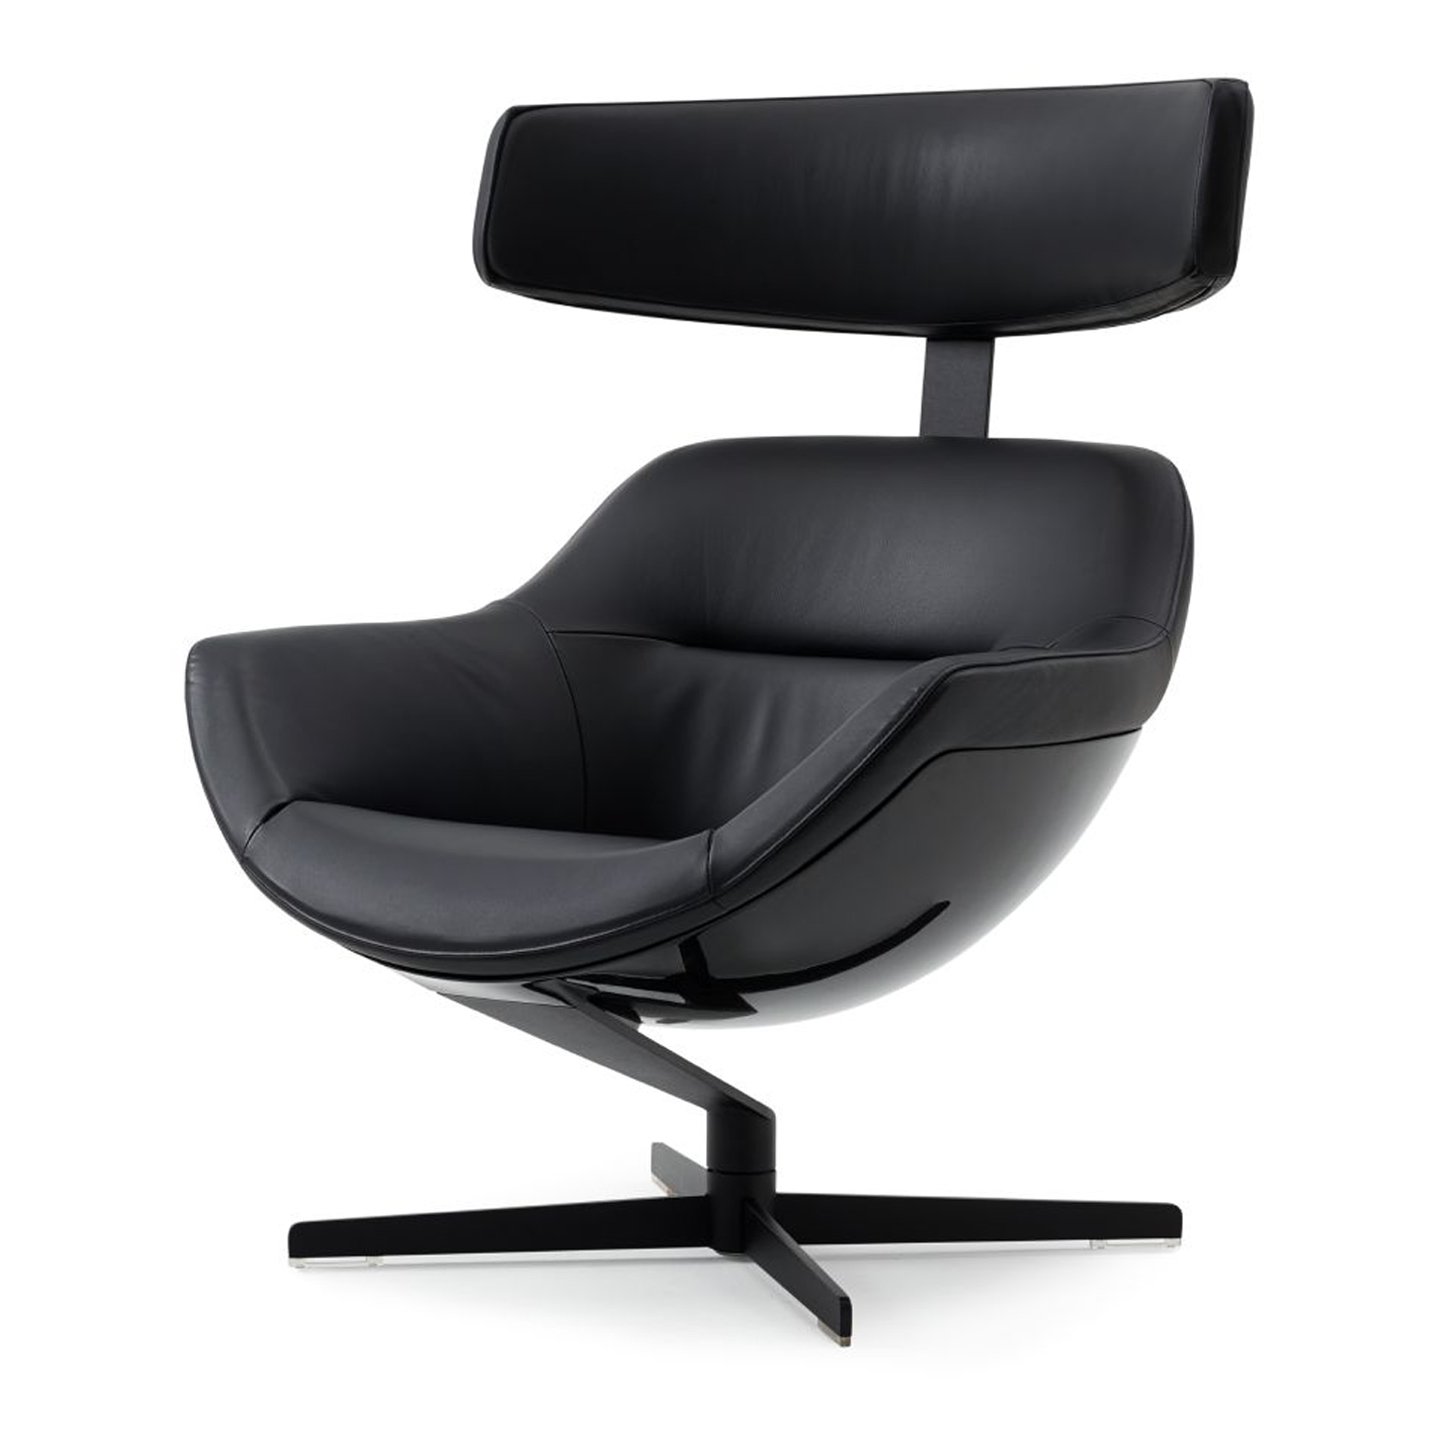 Haworth Auckland chair in black leather in a side angle